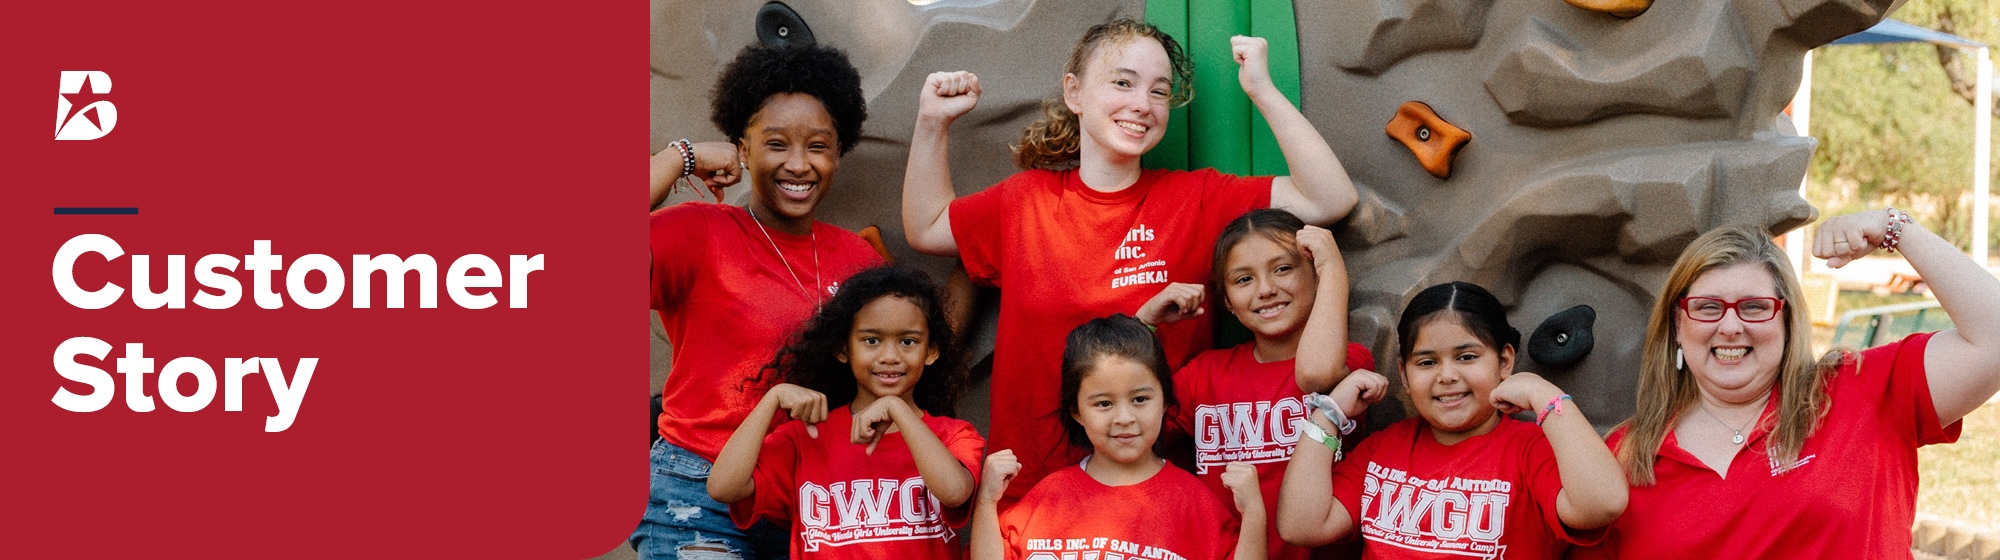 Girls Inc. President and CEO Lea Rosenauer and her team help young girls overcome barriers through opportunities, mentorship and a powerful sisterhood.